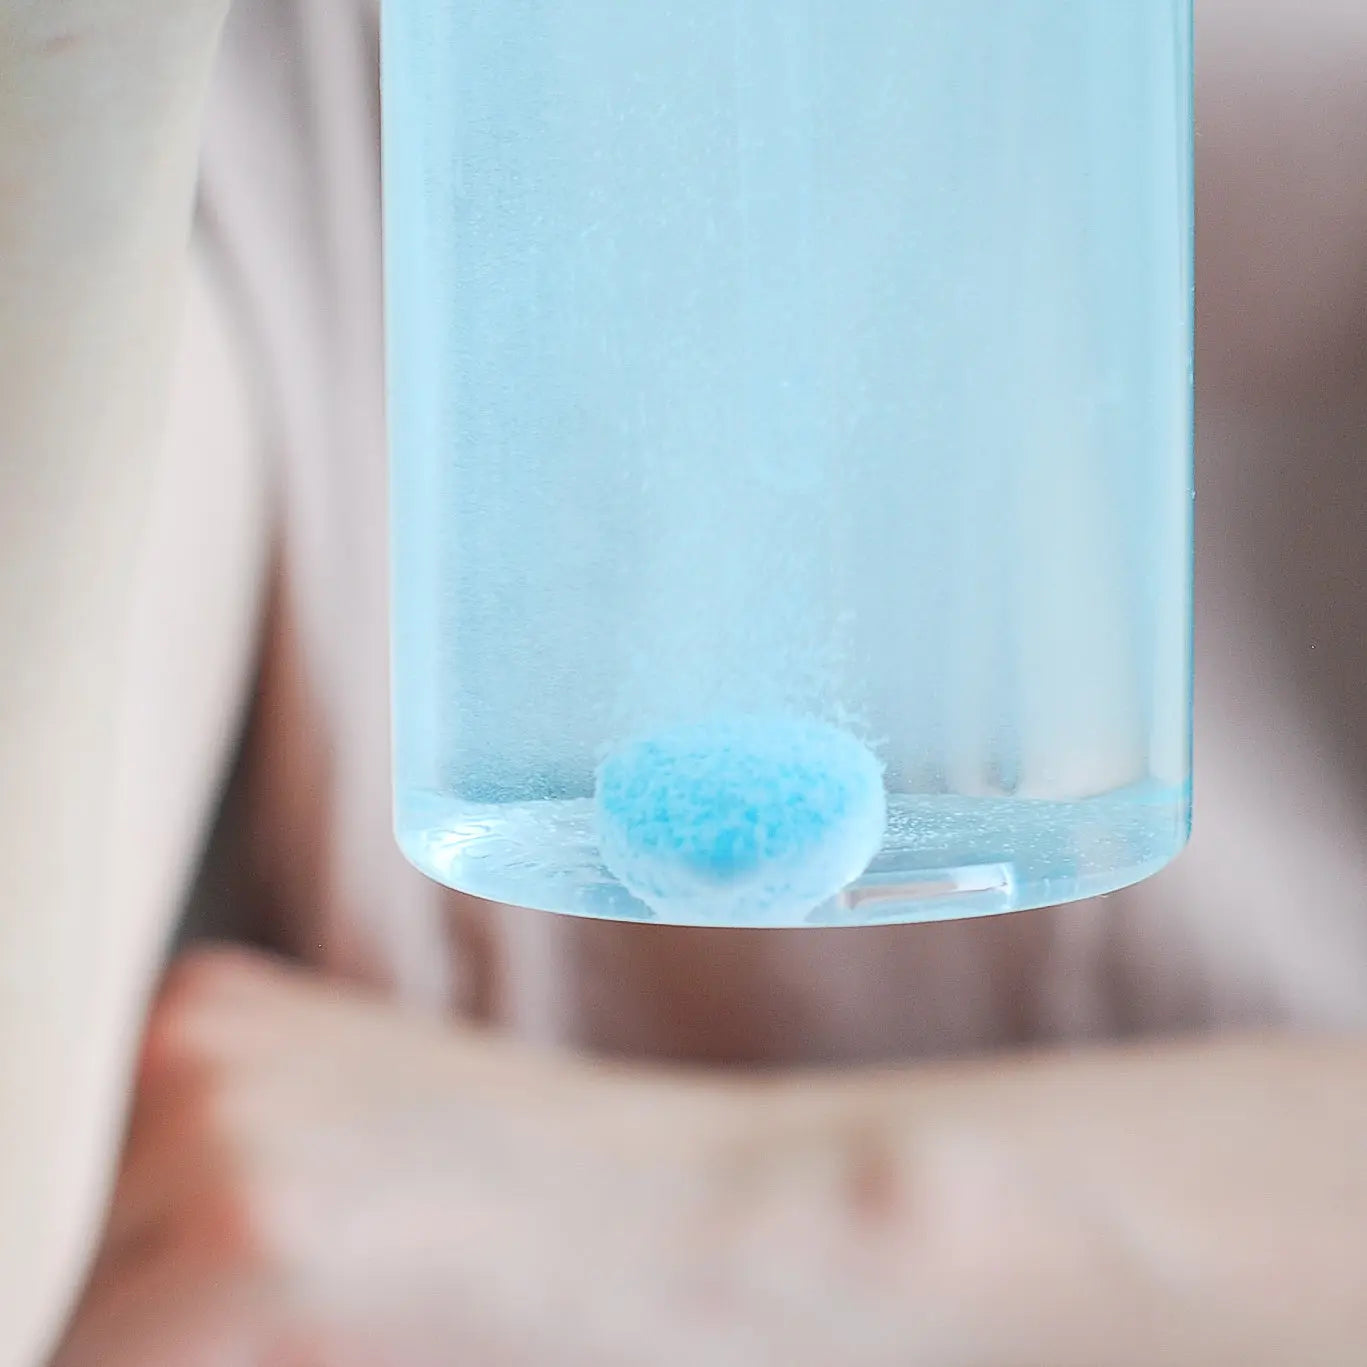 Dissolving glass and window cleaner tablet in plastic spray bottle